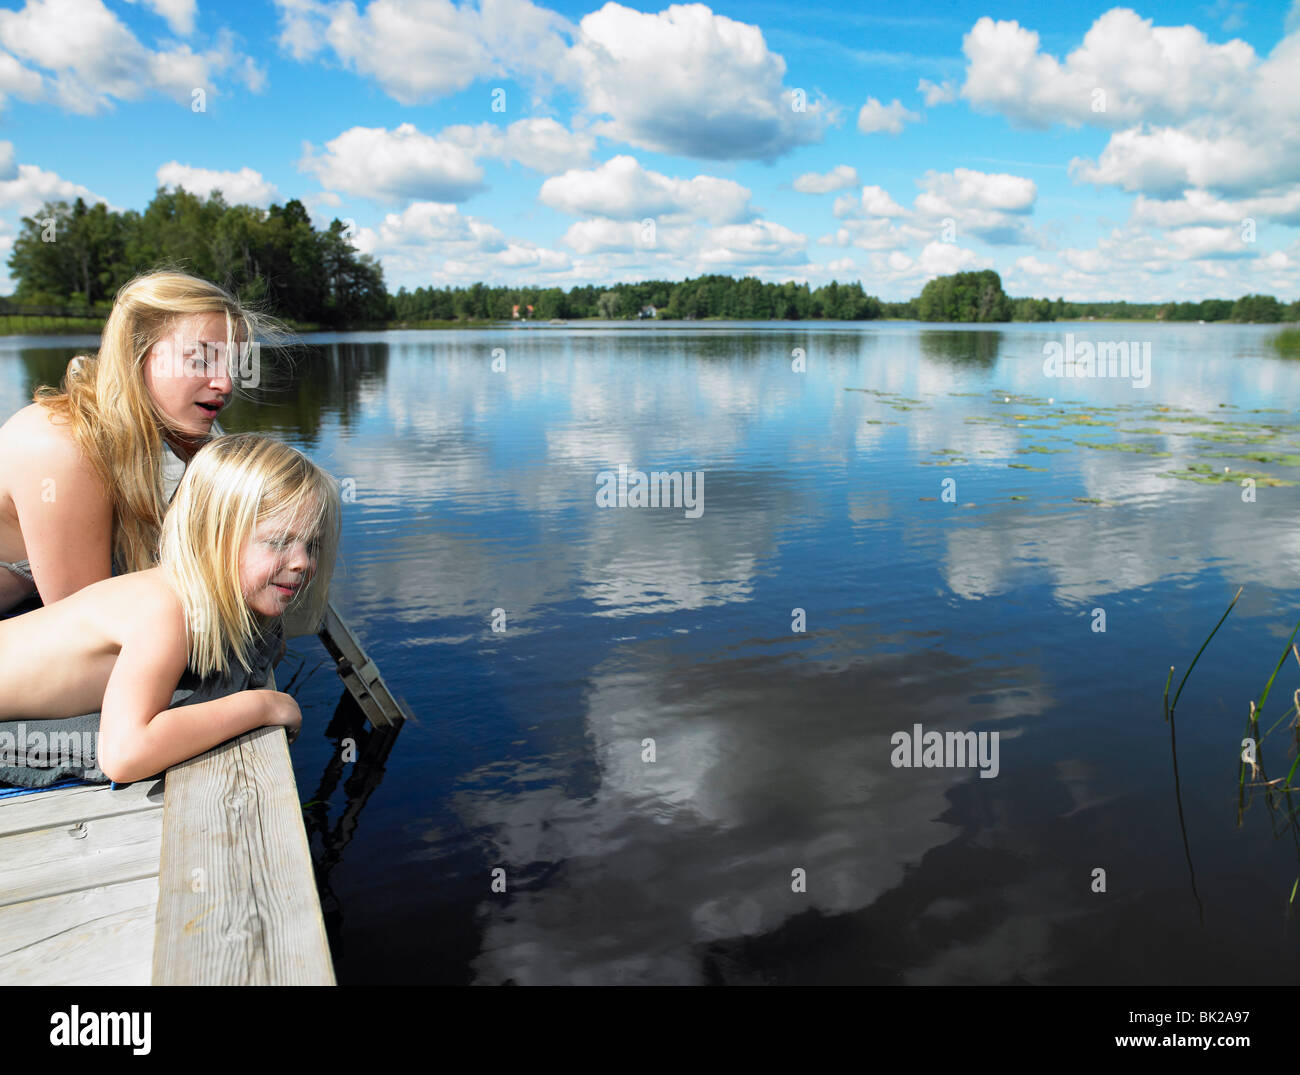 Woman and girl on a dock Stock Photo